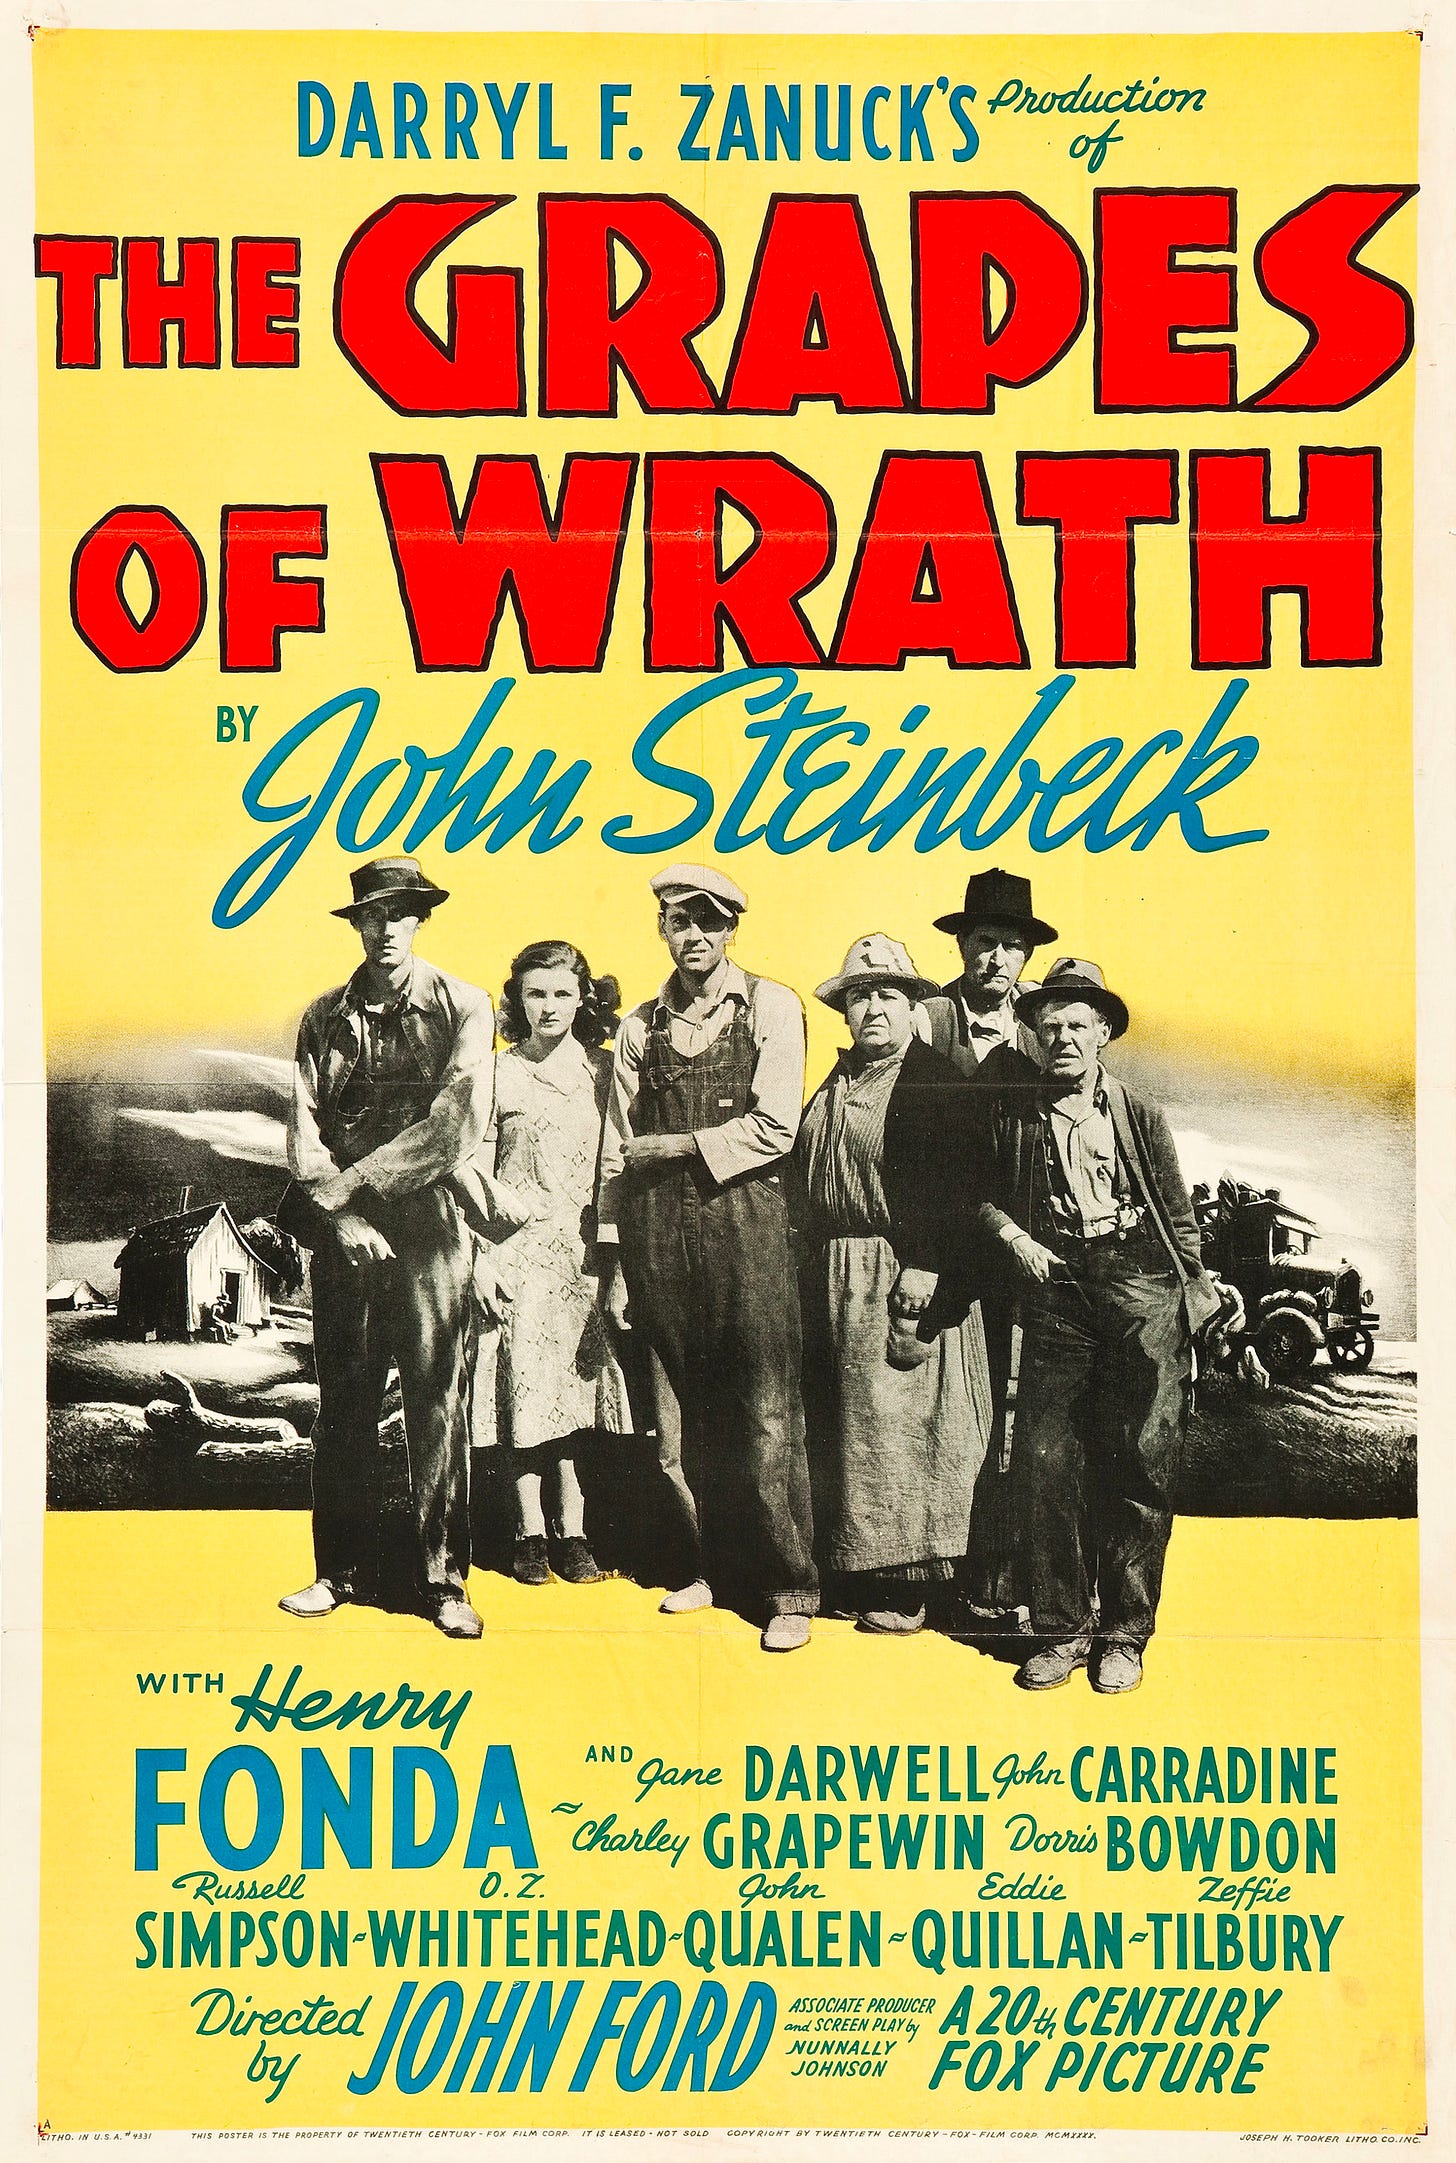 The Grapes of Wrath (film) - Wikipedia